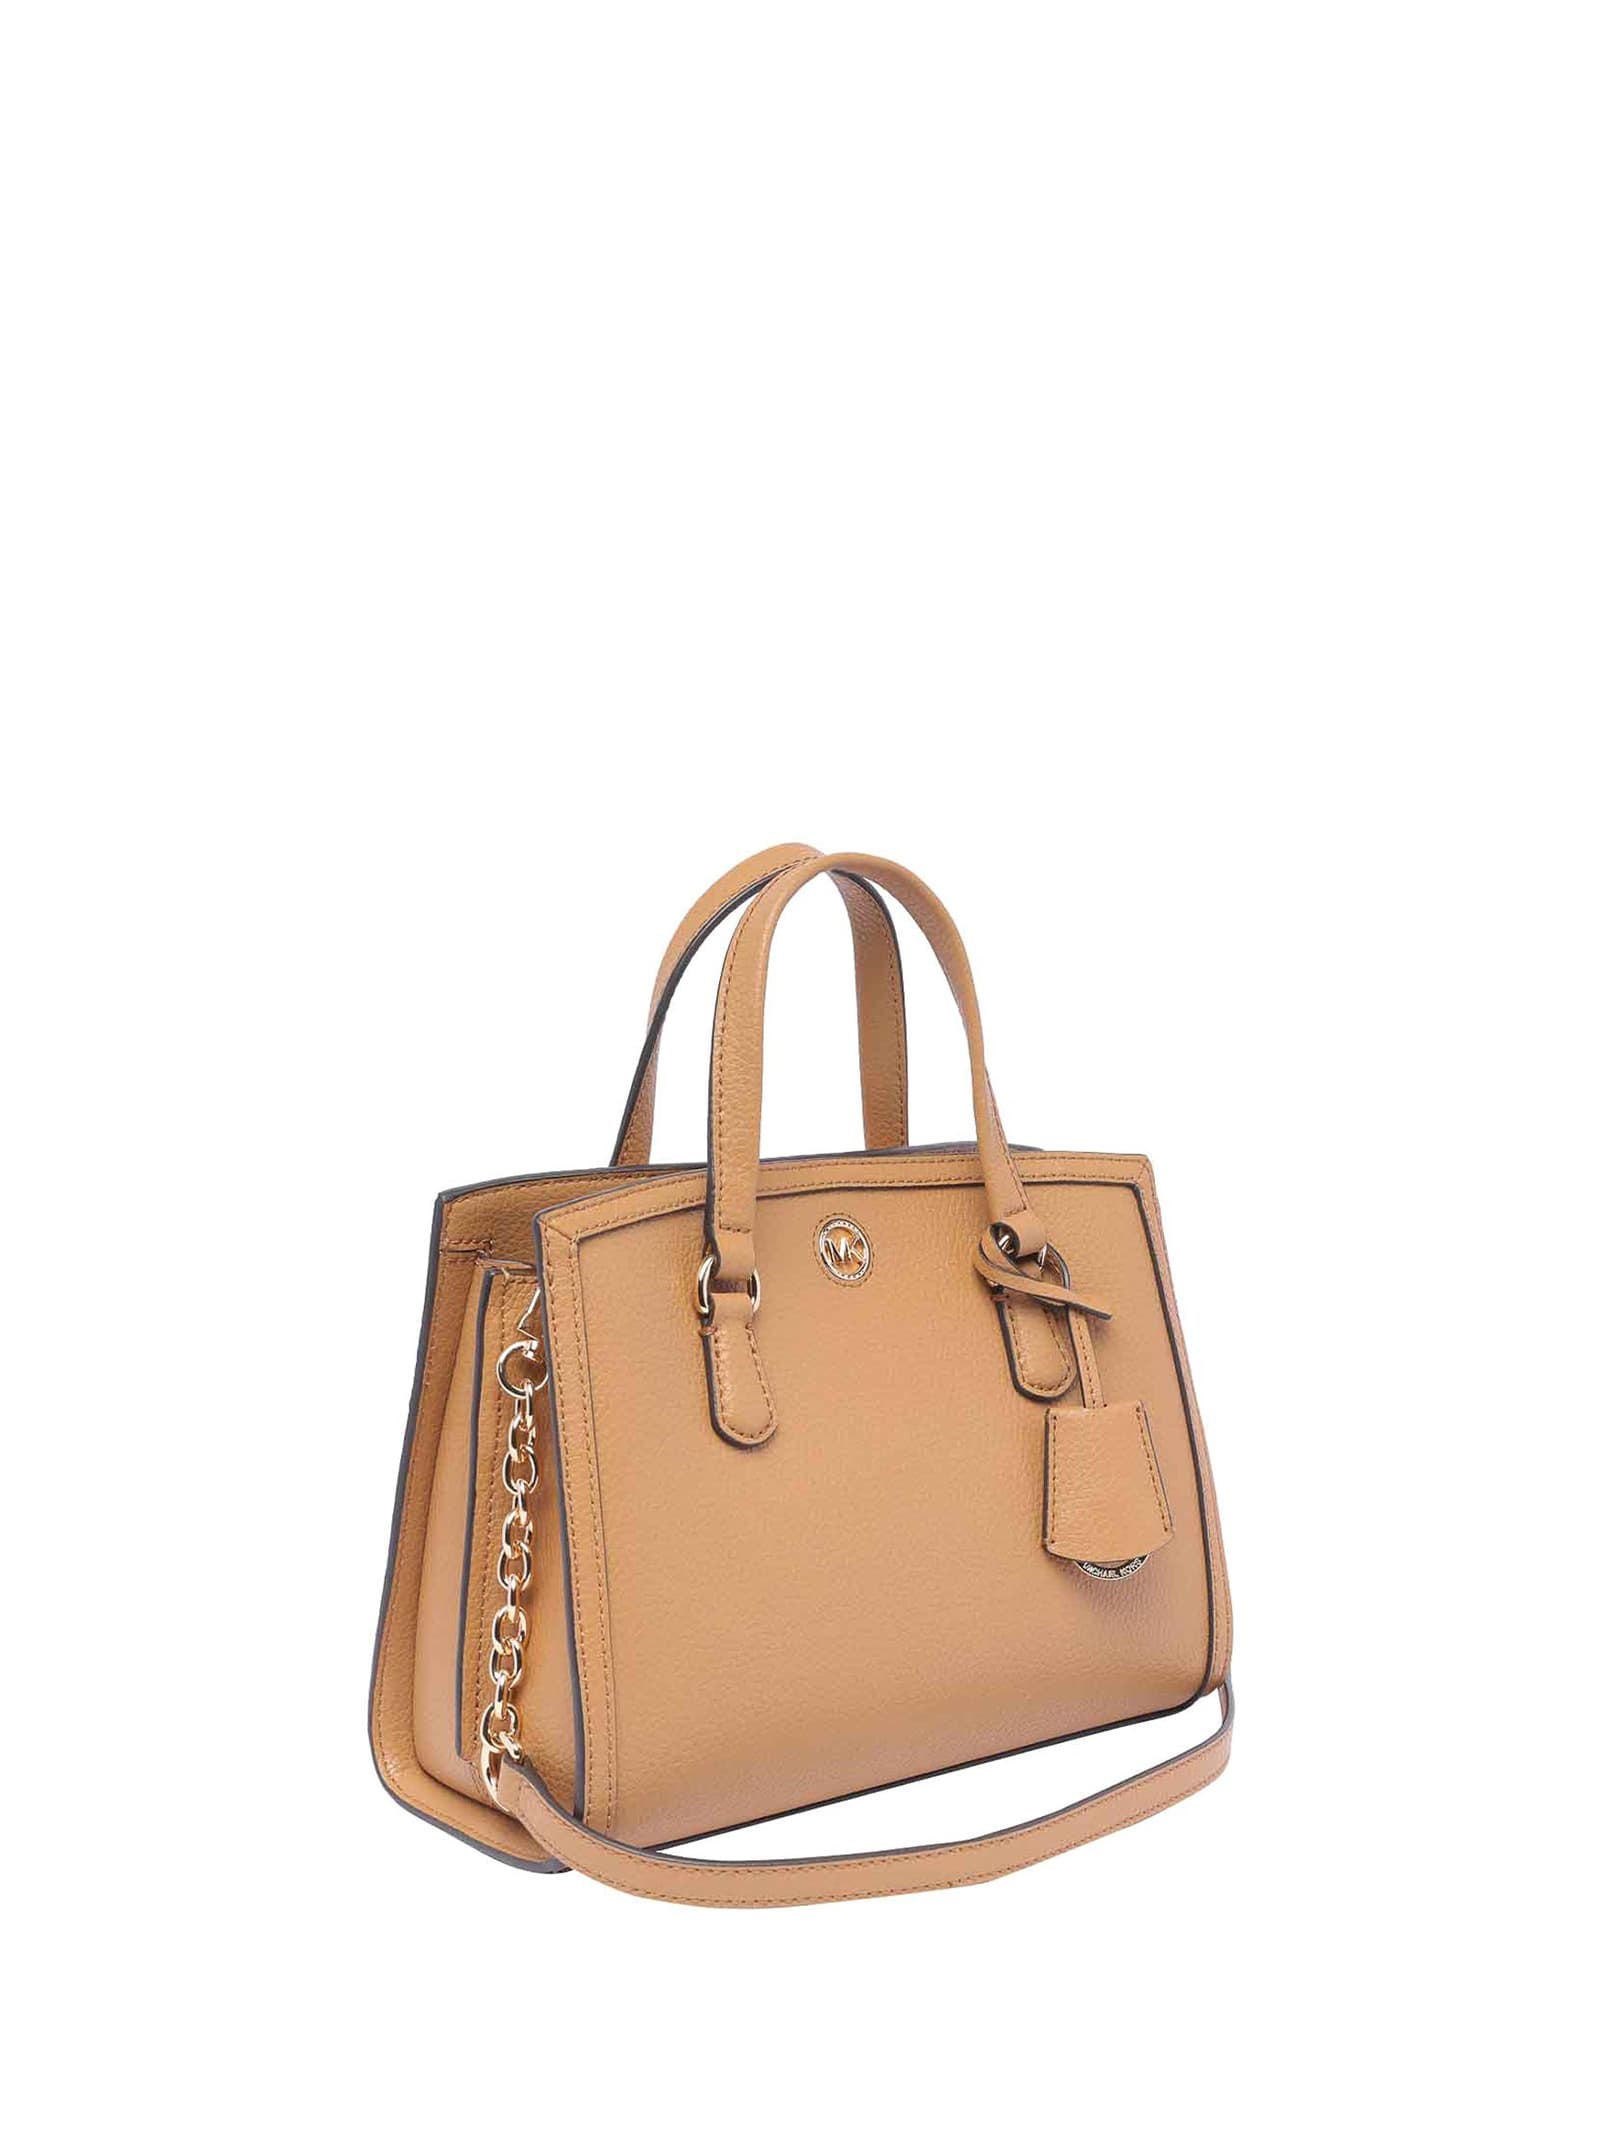 Shop Michael Kors Small Chantal Bag In Grained Leather In Pale Peanut